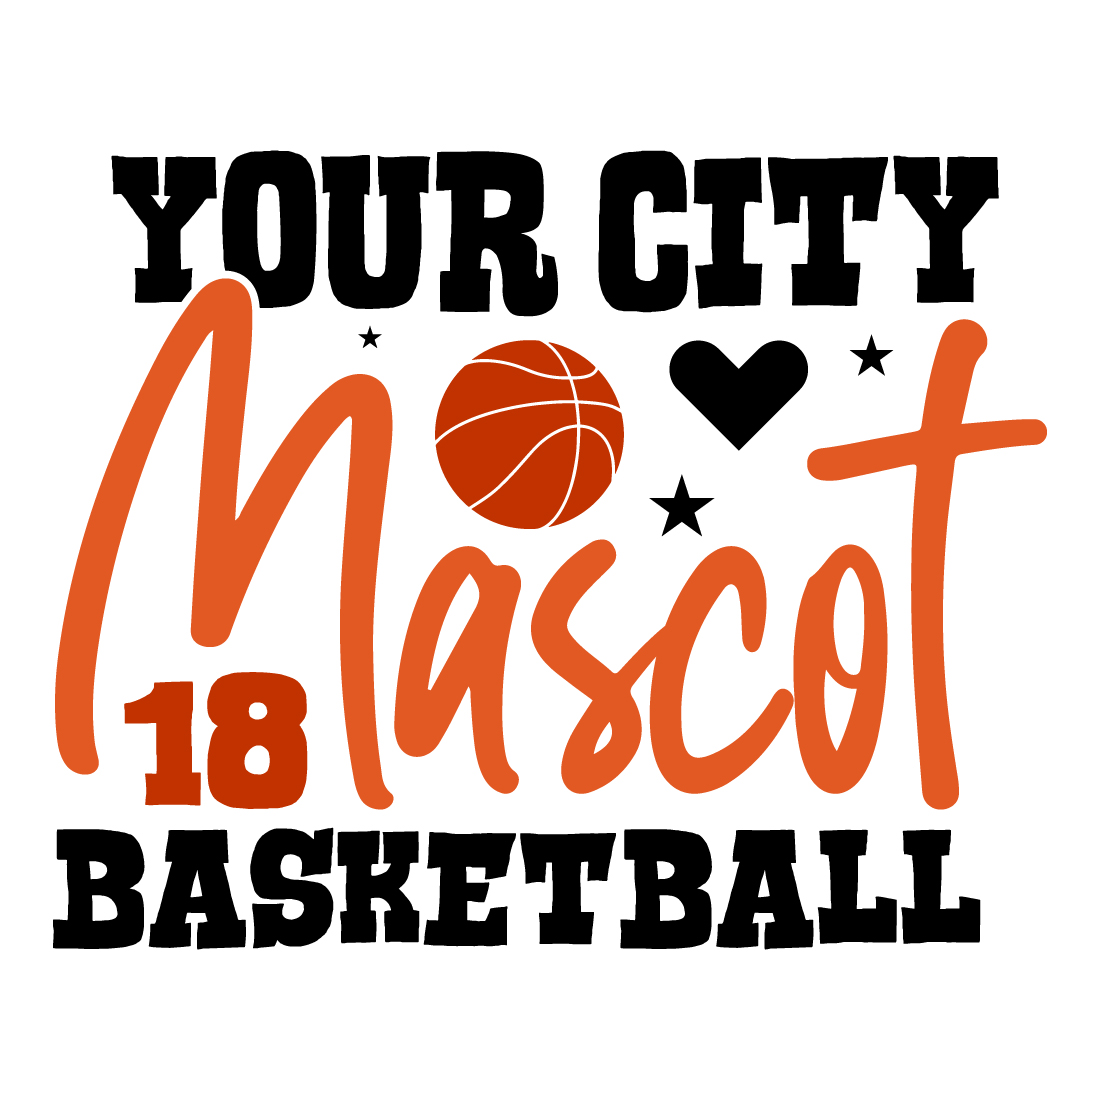 Your City Mascot 18 Basketball preview image.